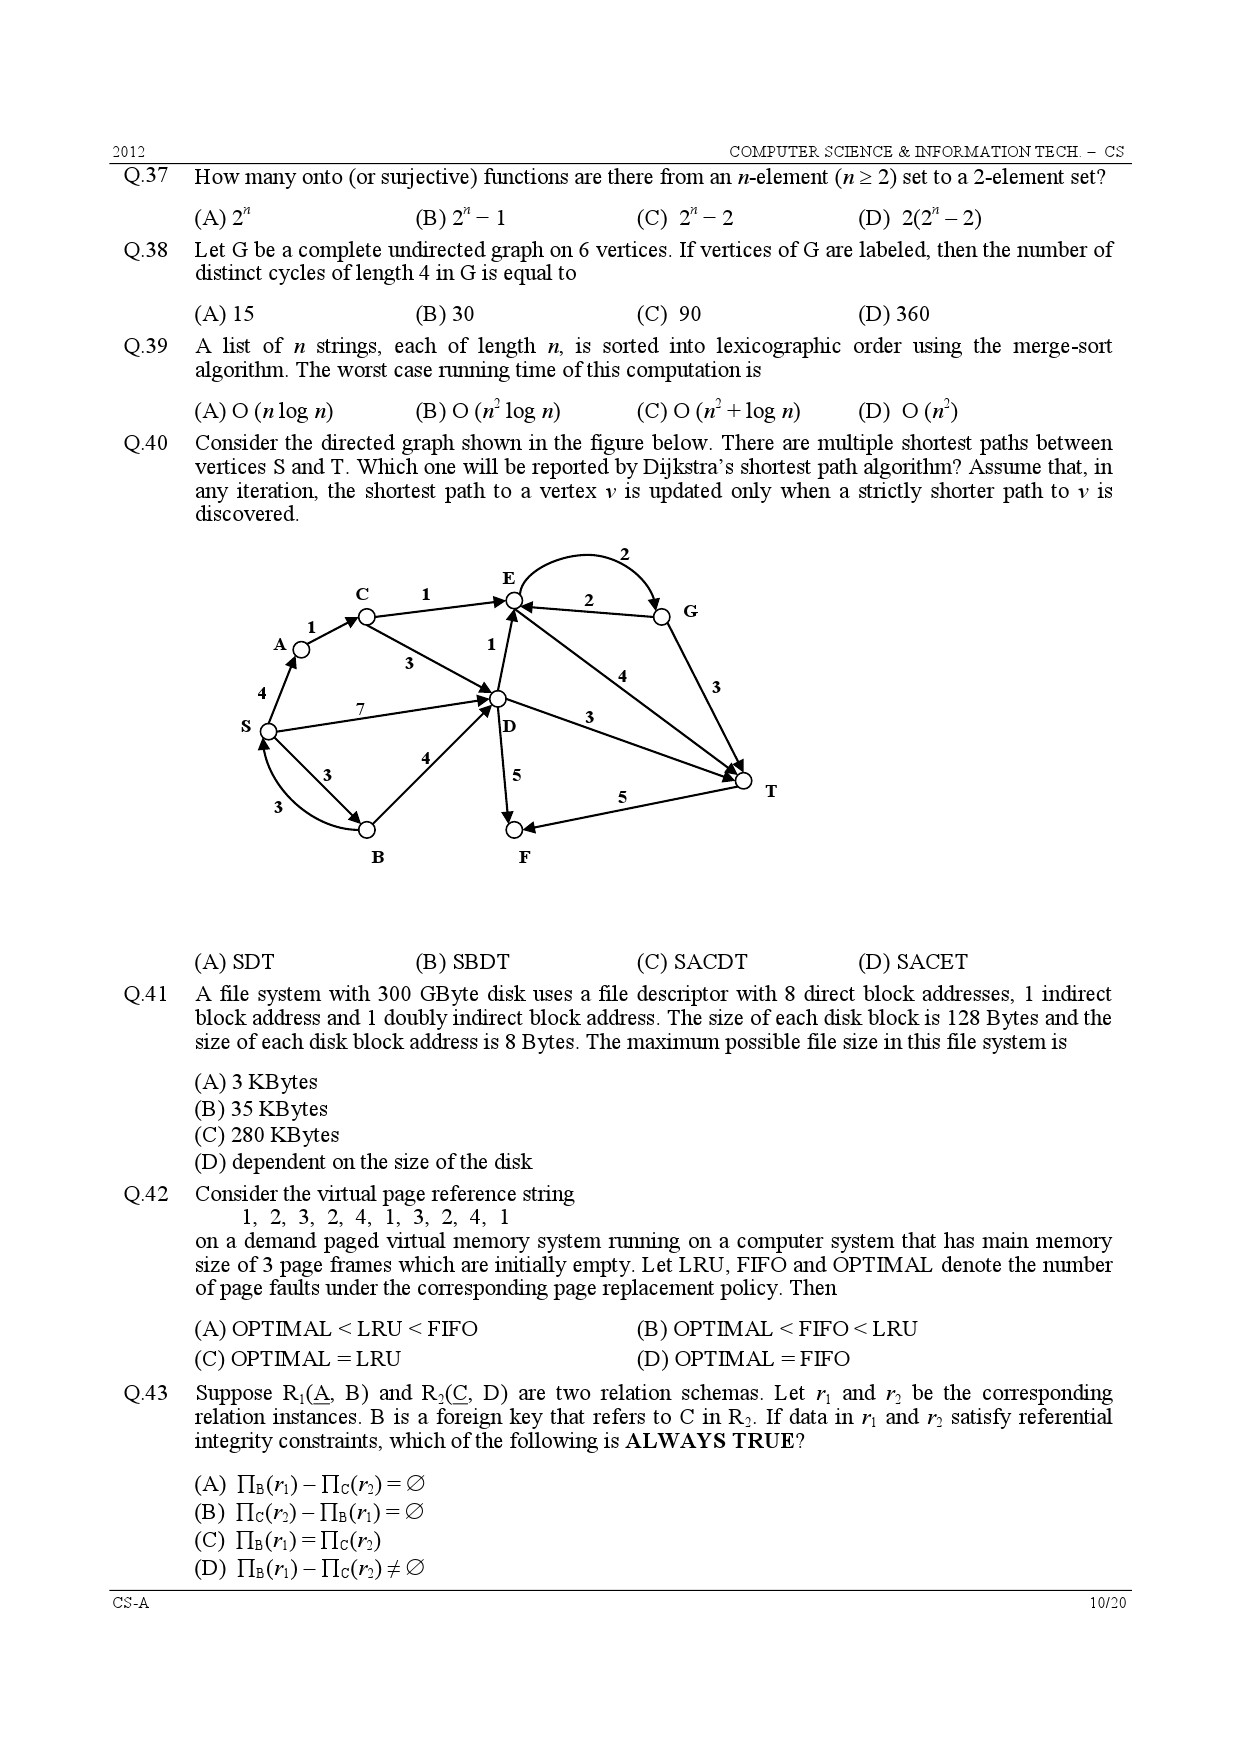 GATE Exam Question Paper 2012 Computer Science and Information Technology 10